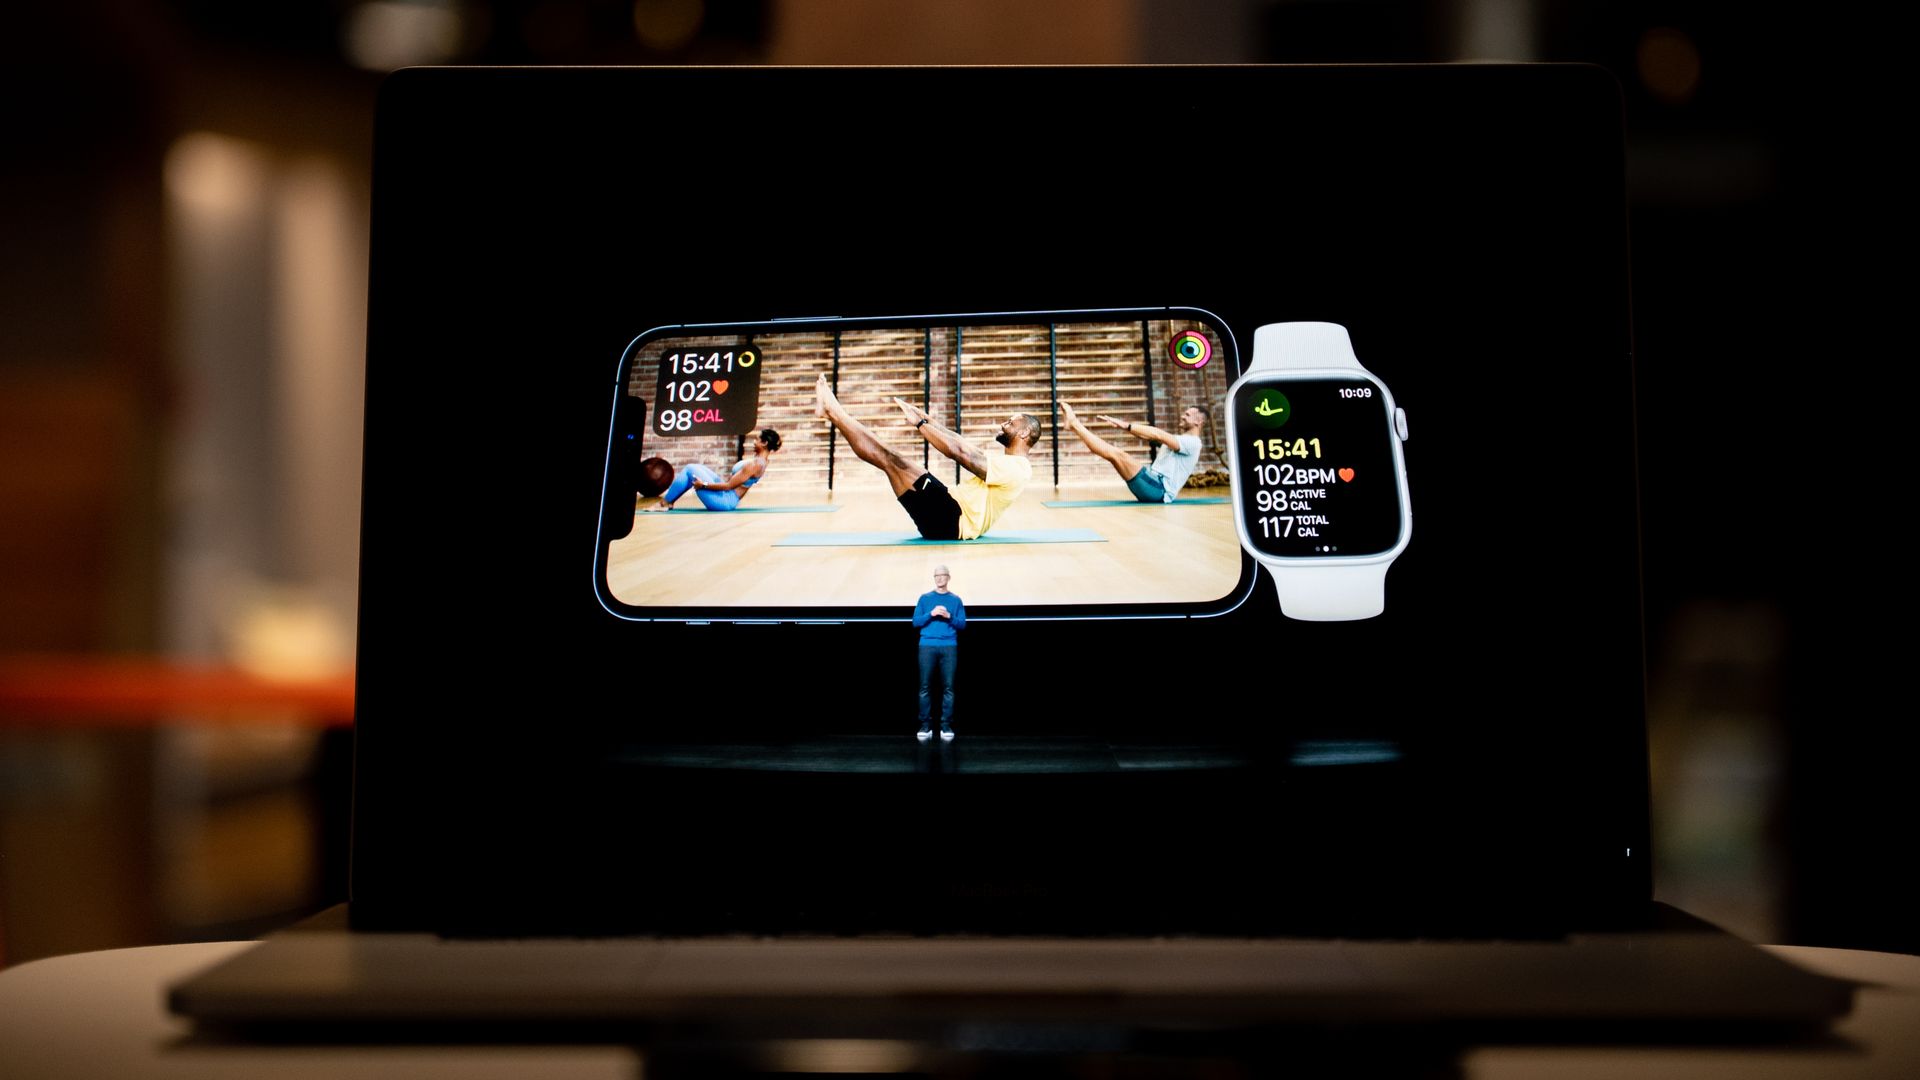 The new Apple Fitness+ program is debuted during the California Streaming virtual product launch.